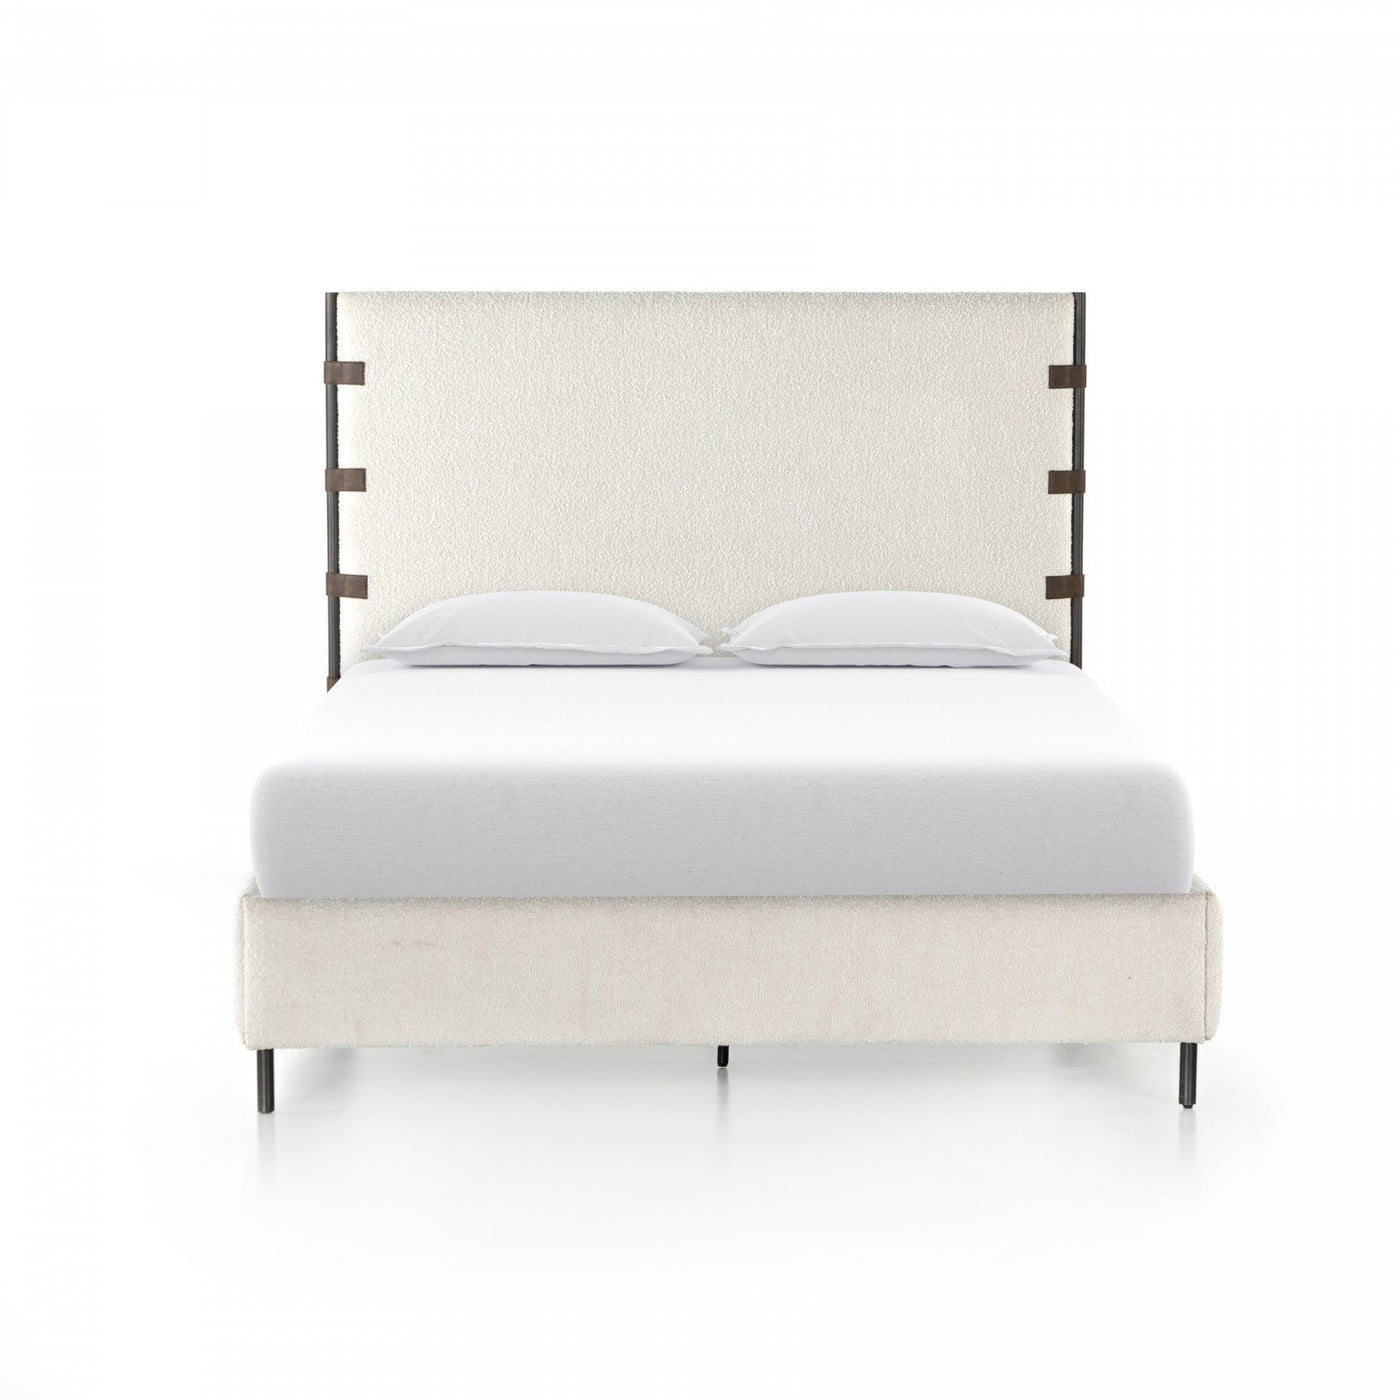 ANDERSON BED,KING